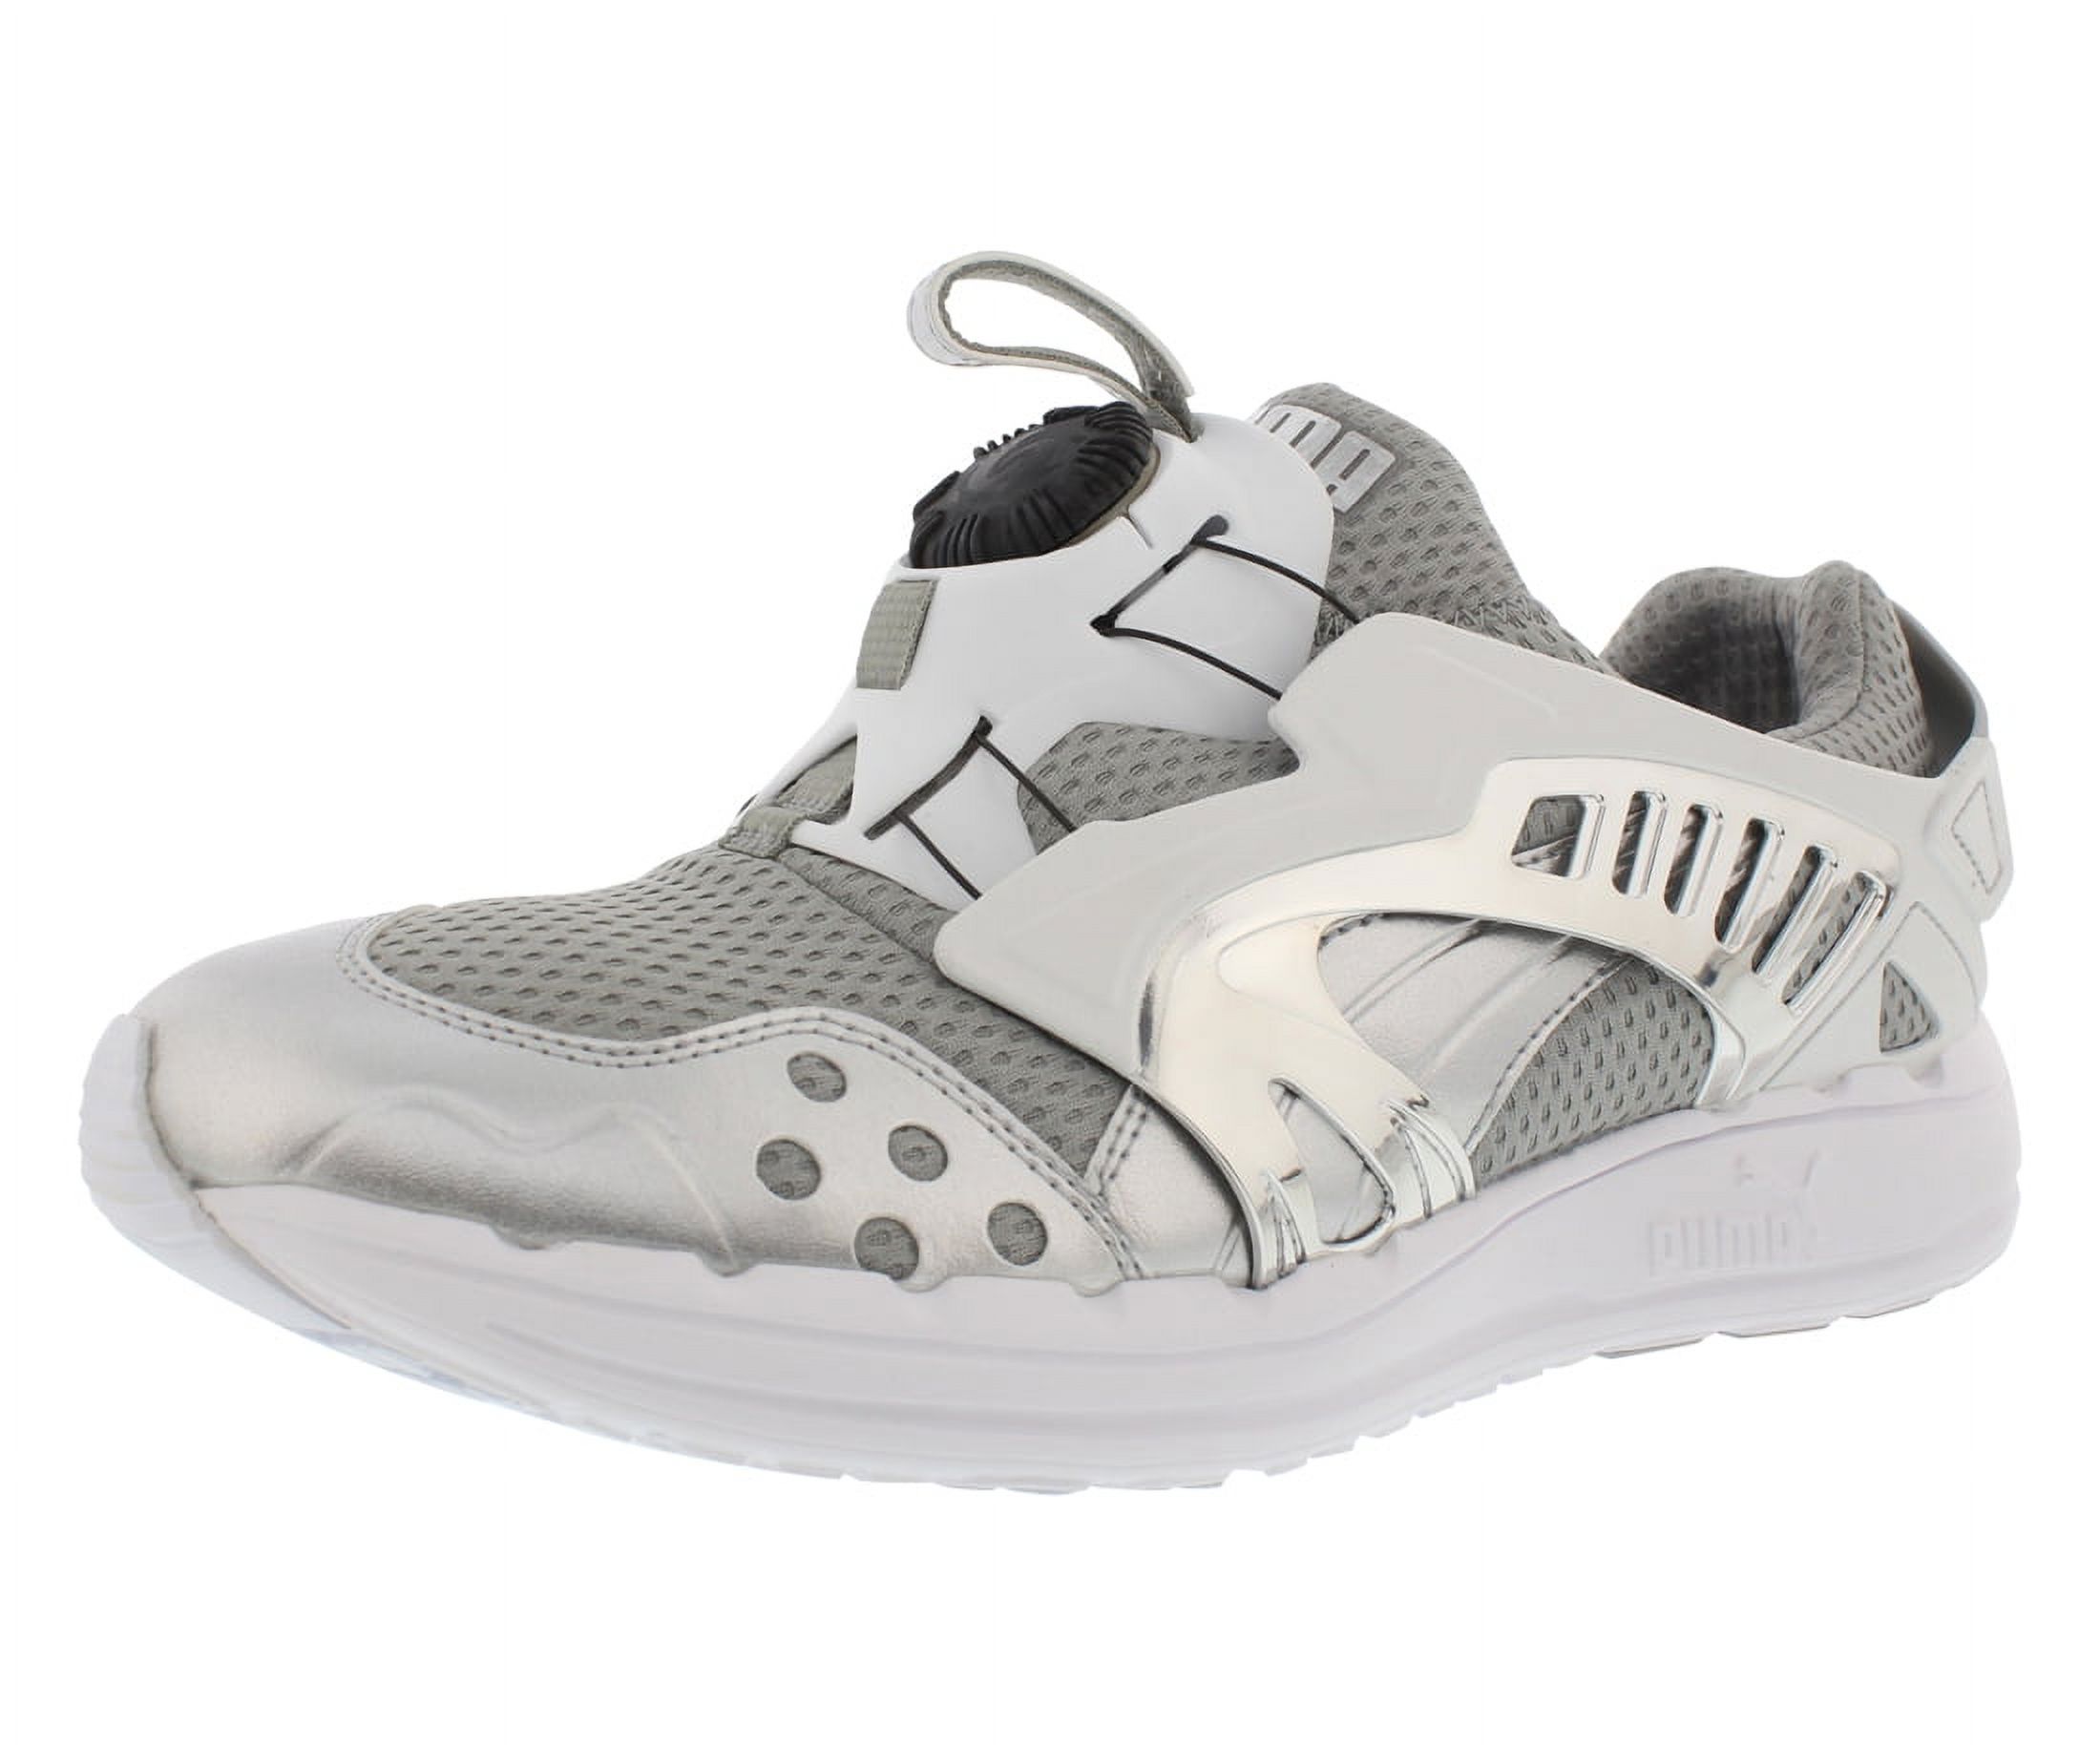 Puma Future Disc Lt Opulence Men's Athletic Slip On Shoes Sneakers, Grey - image 2 of 4